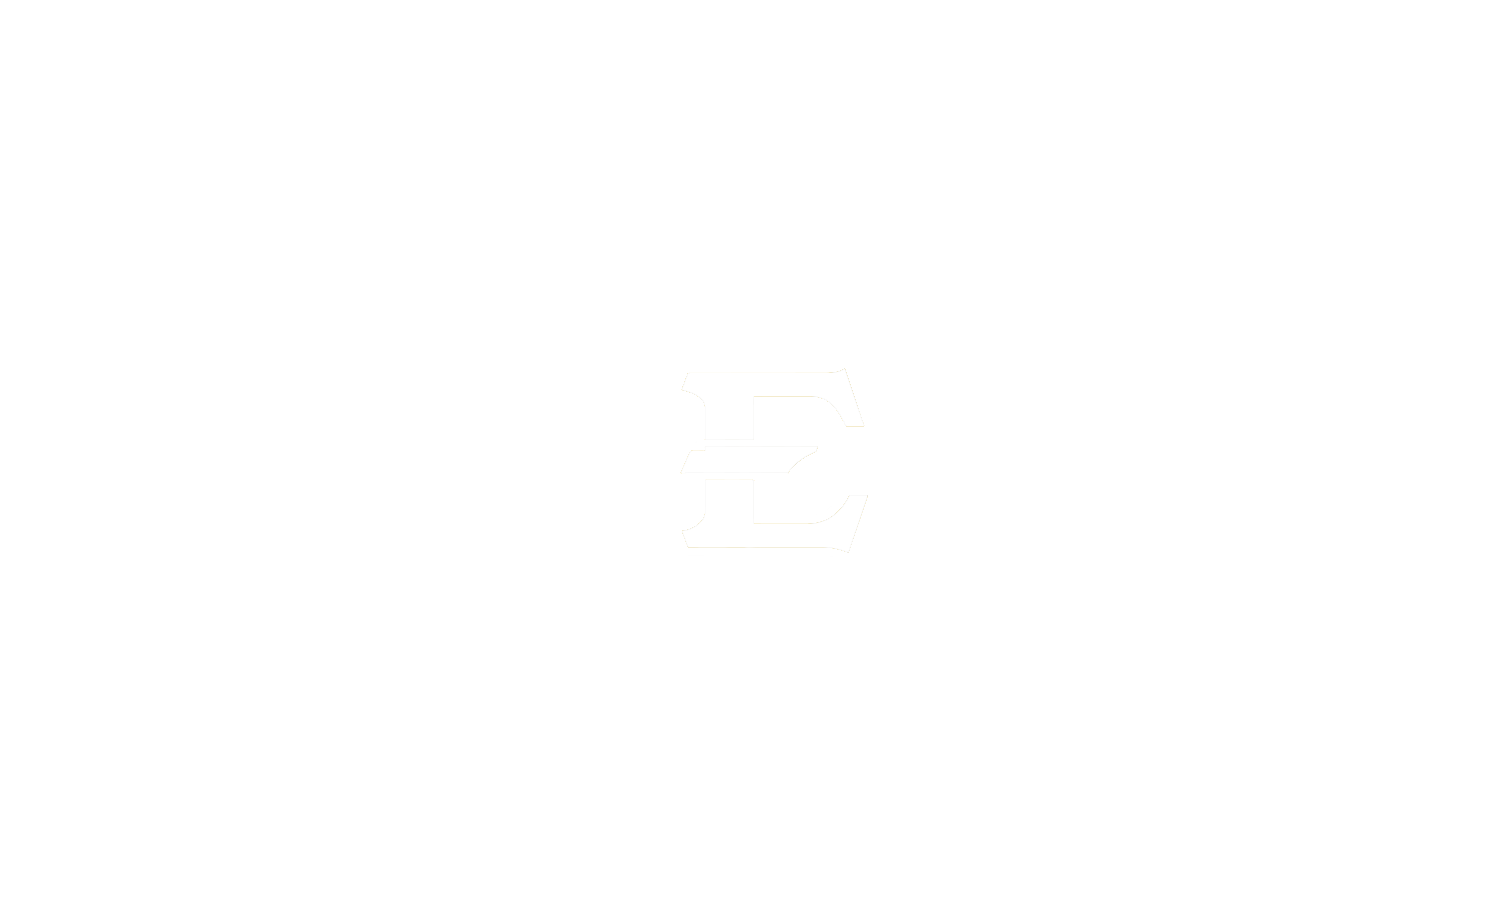 A "Be Great" workmark